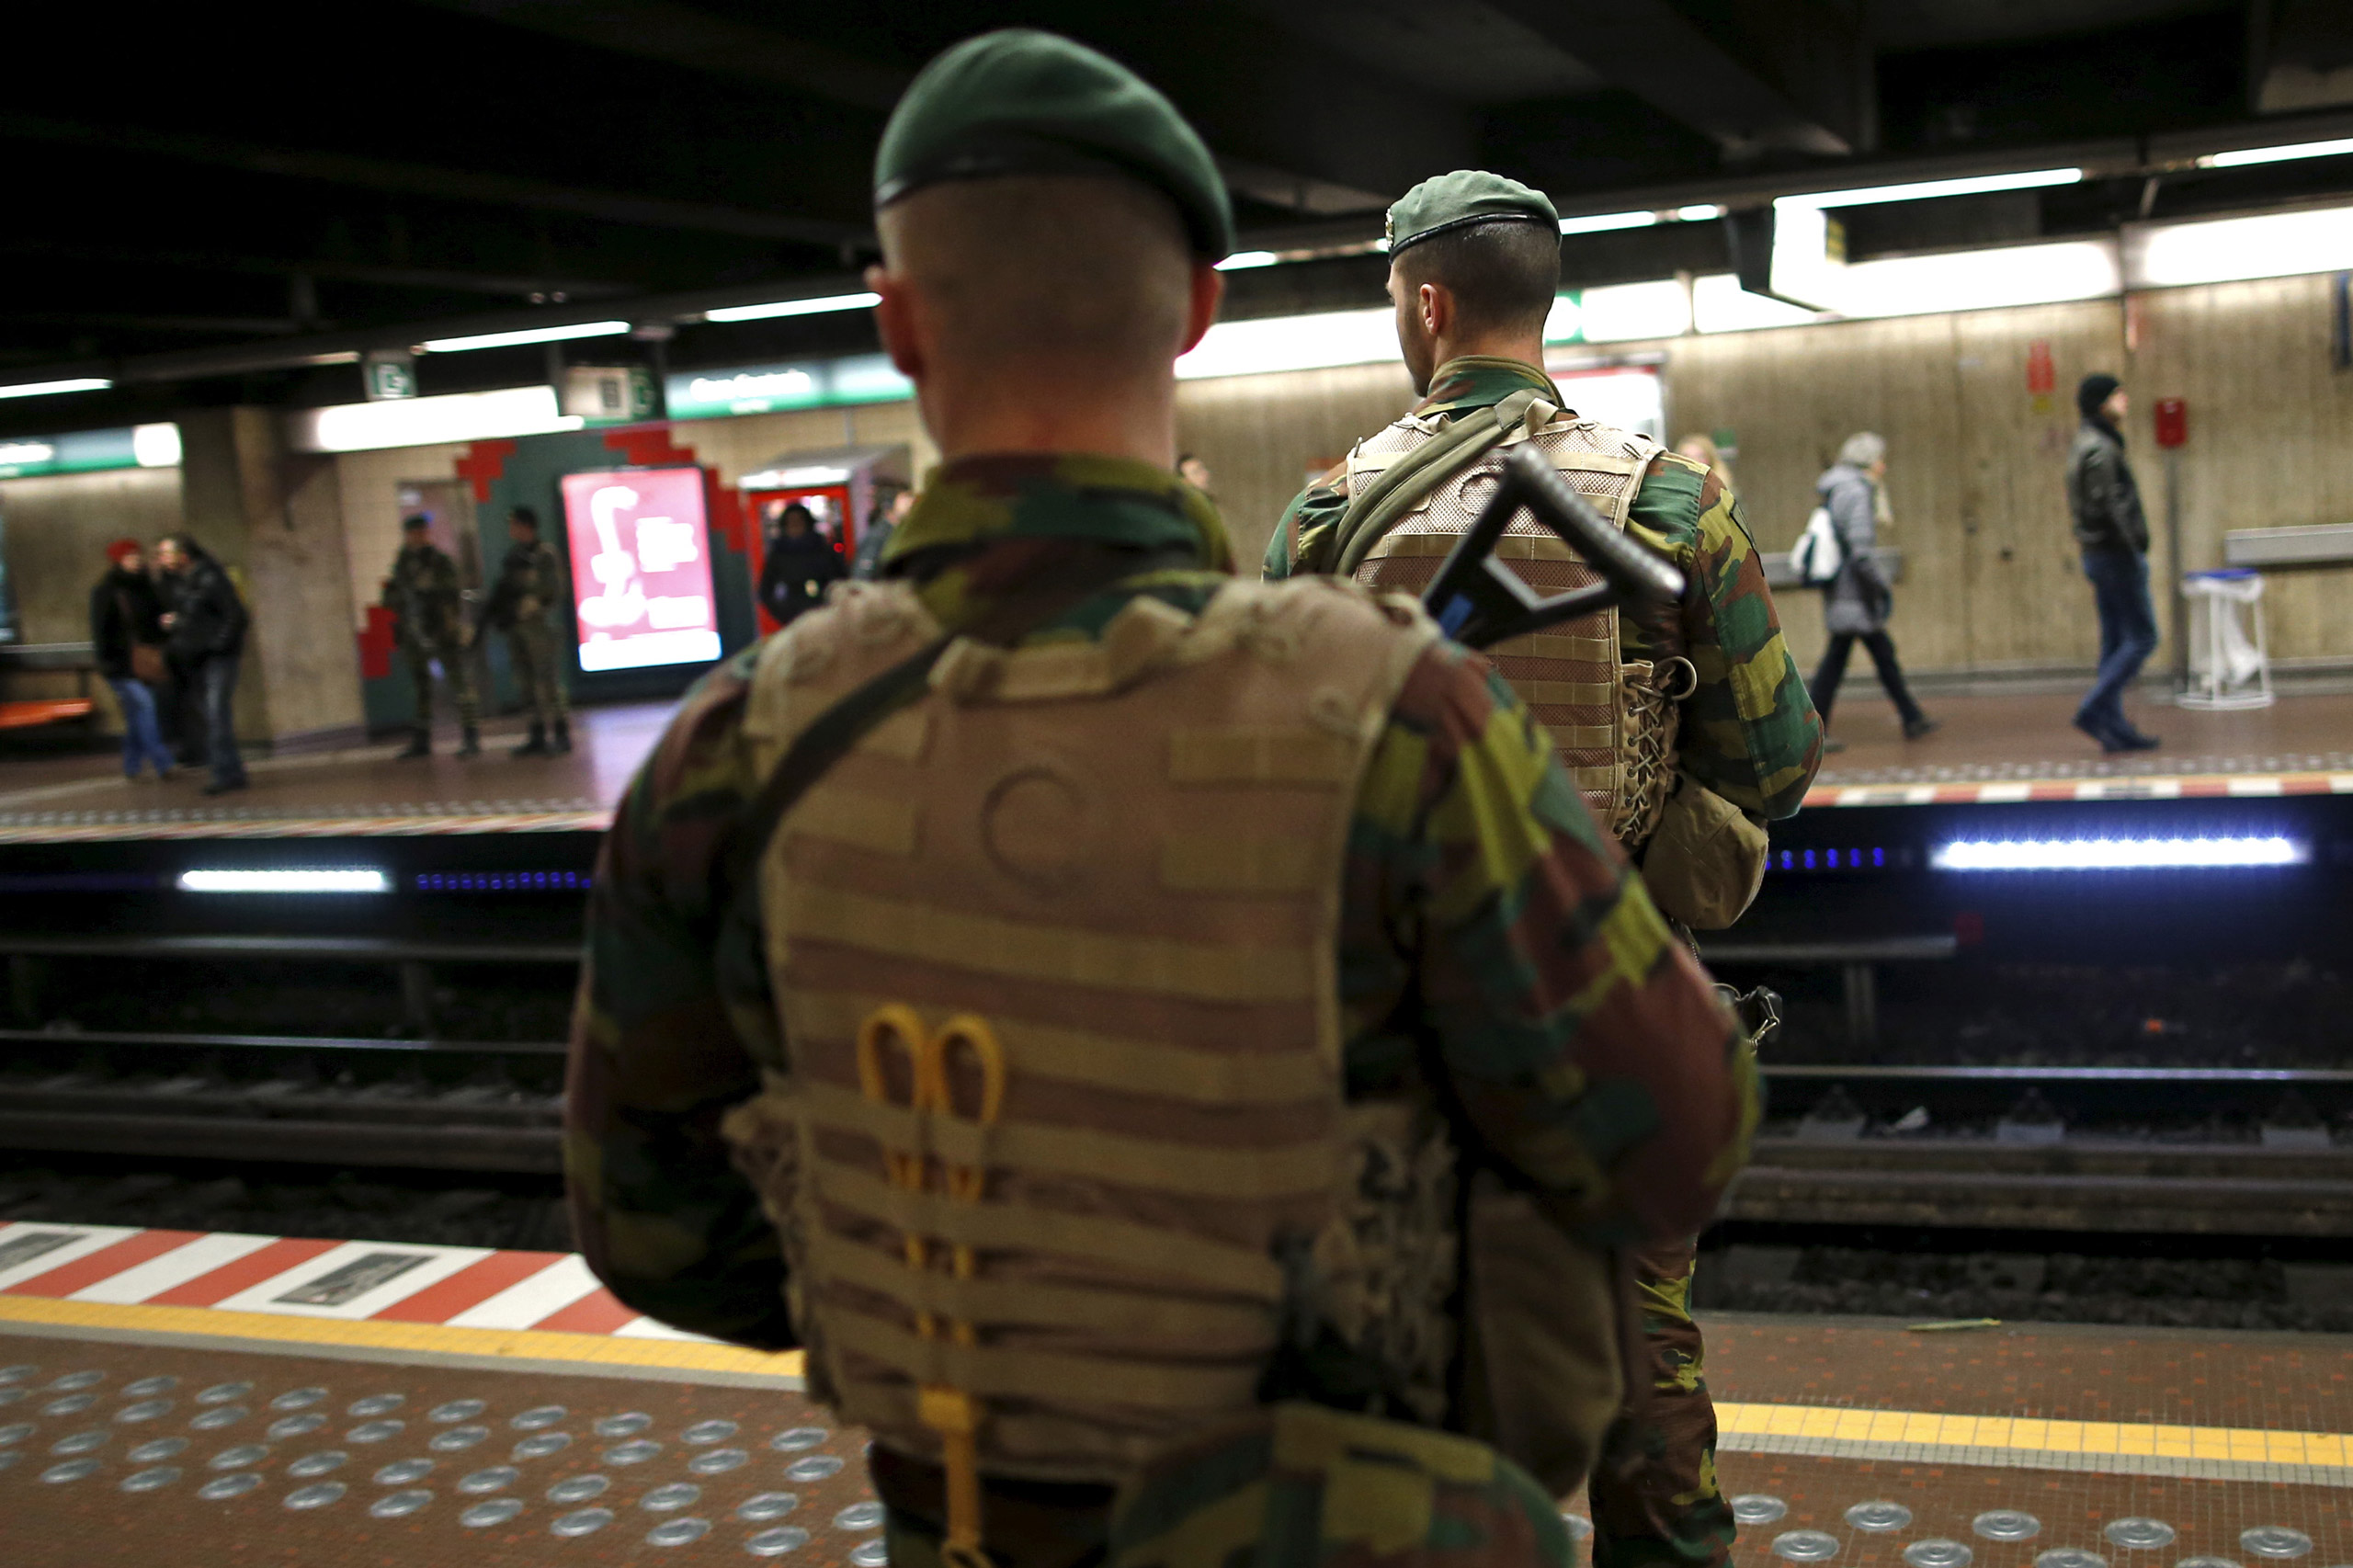 Belgian soldiers patrol at the Central Station subway stop in Brussels on Nov. 25, 2015. (Benoit Tessier—Reuters)